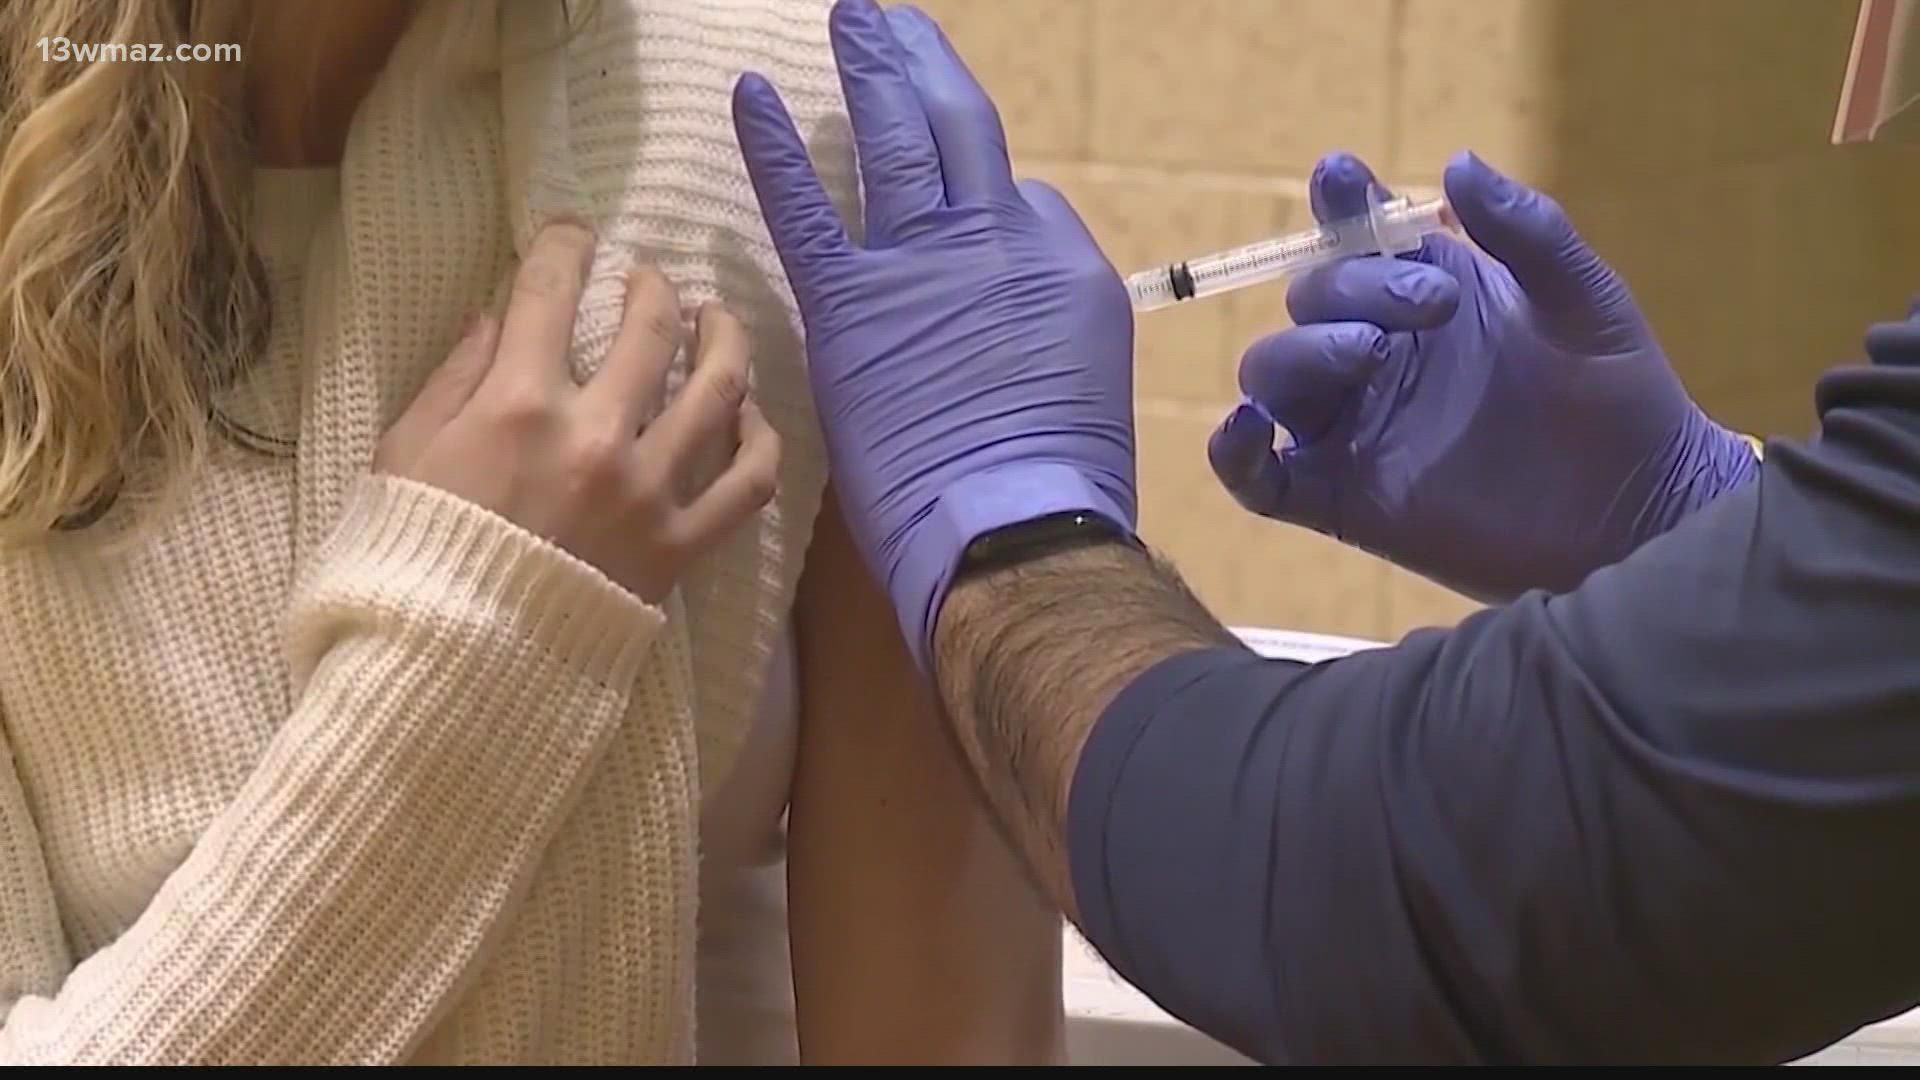 This Friday, state employees will get the day off from work as an extension of the Labor Day holiday geared towards getting more Georgians vaccinated.